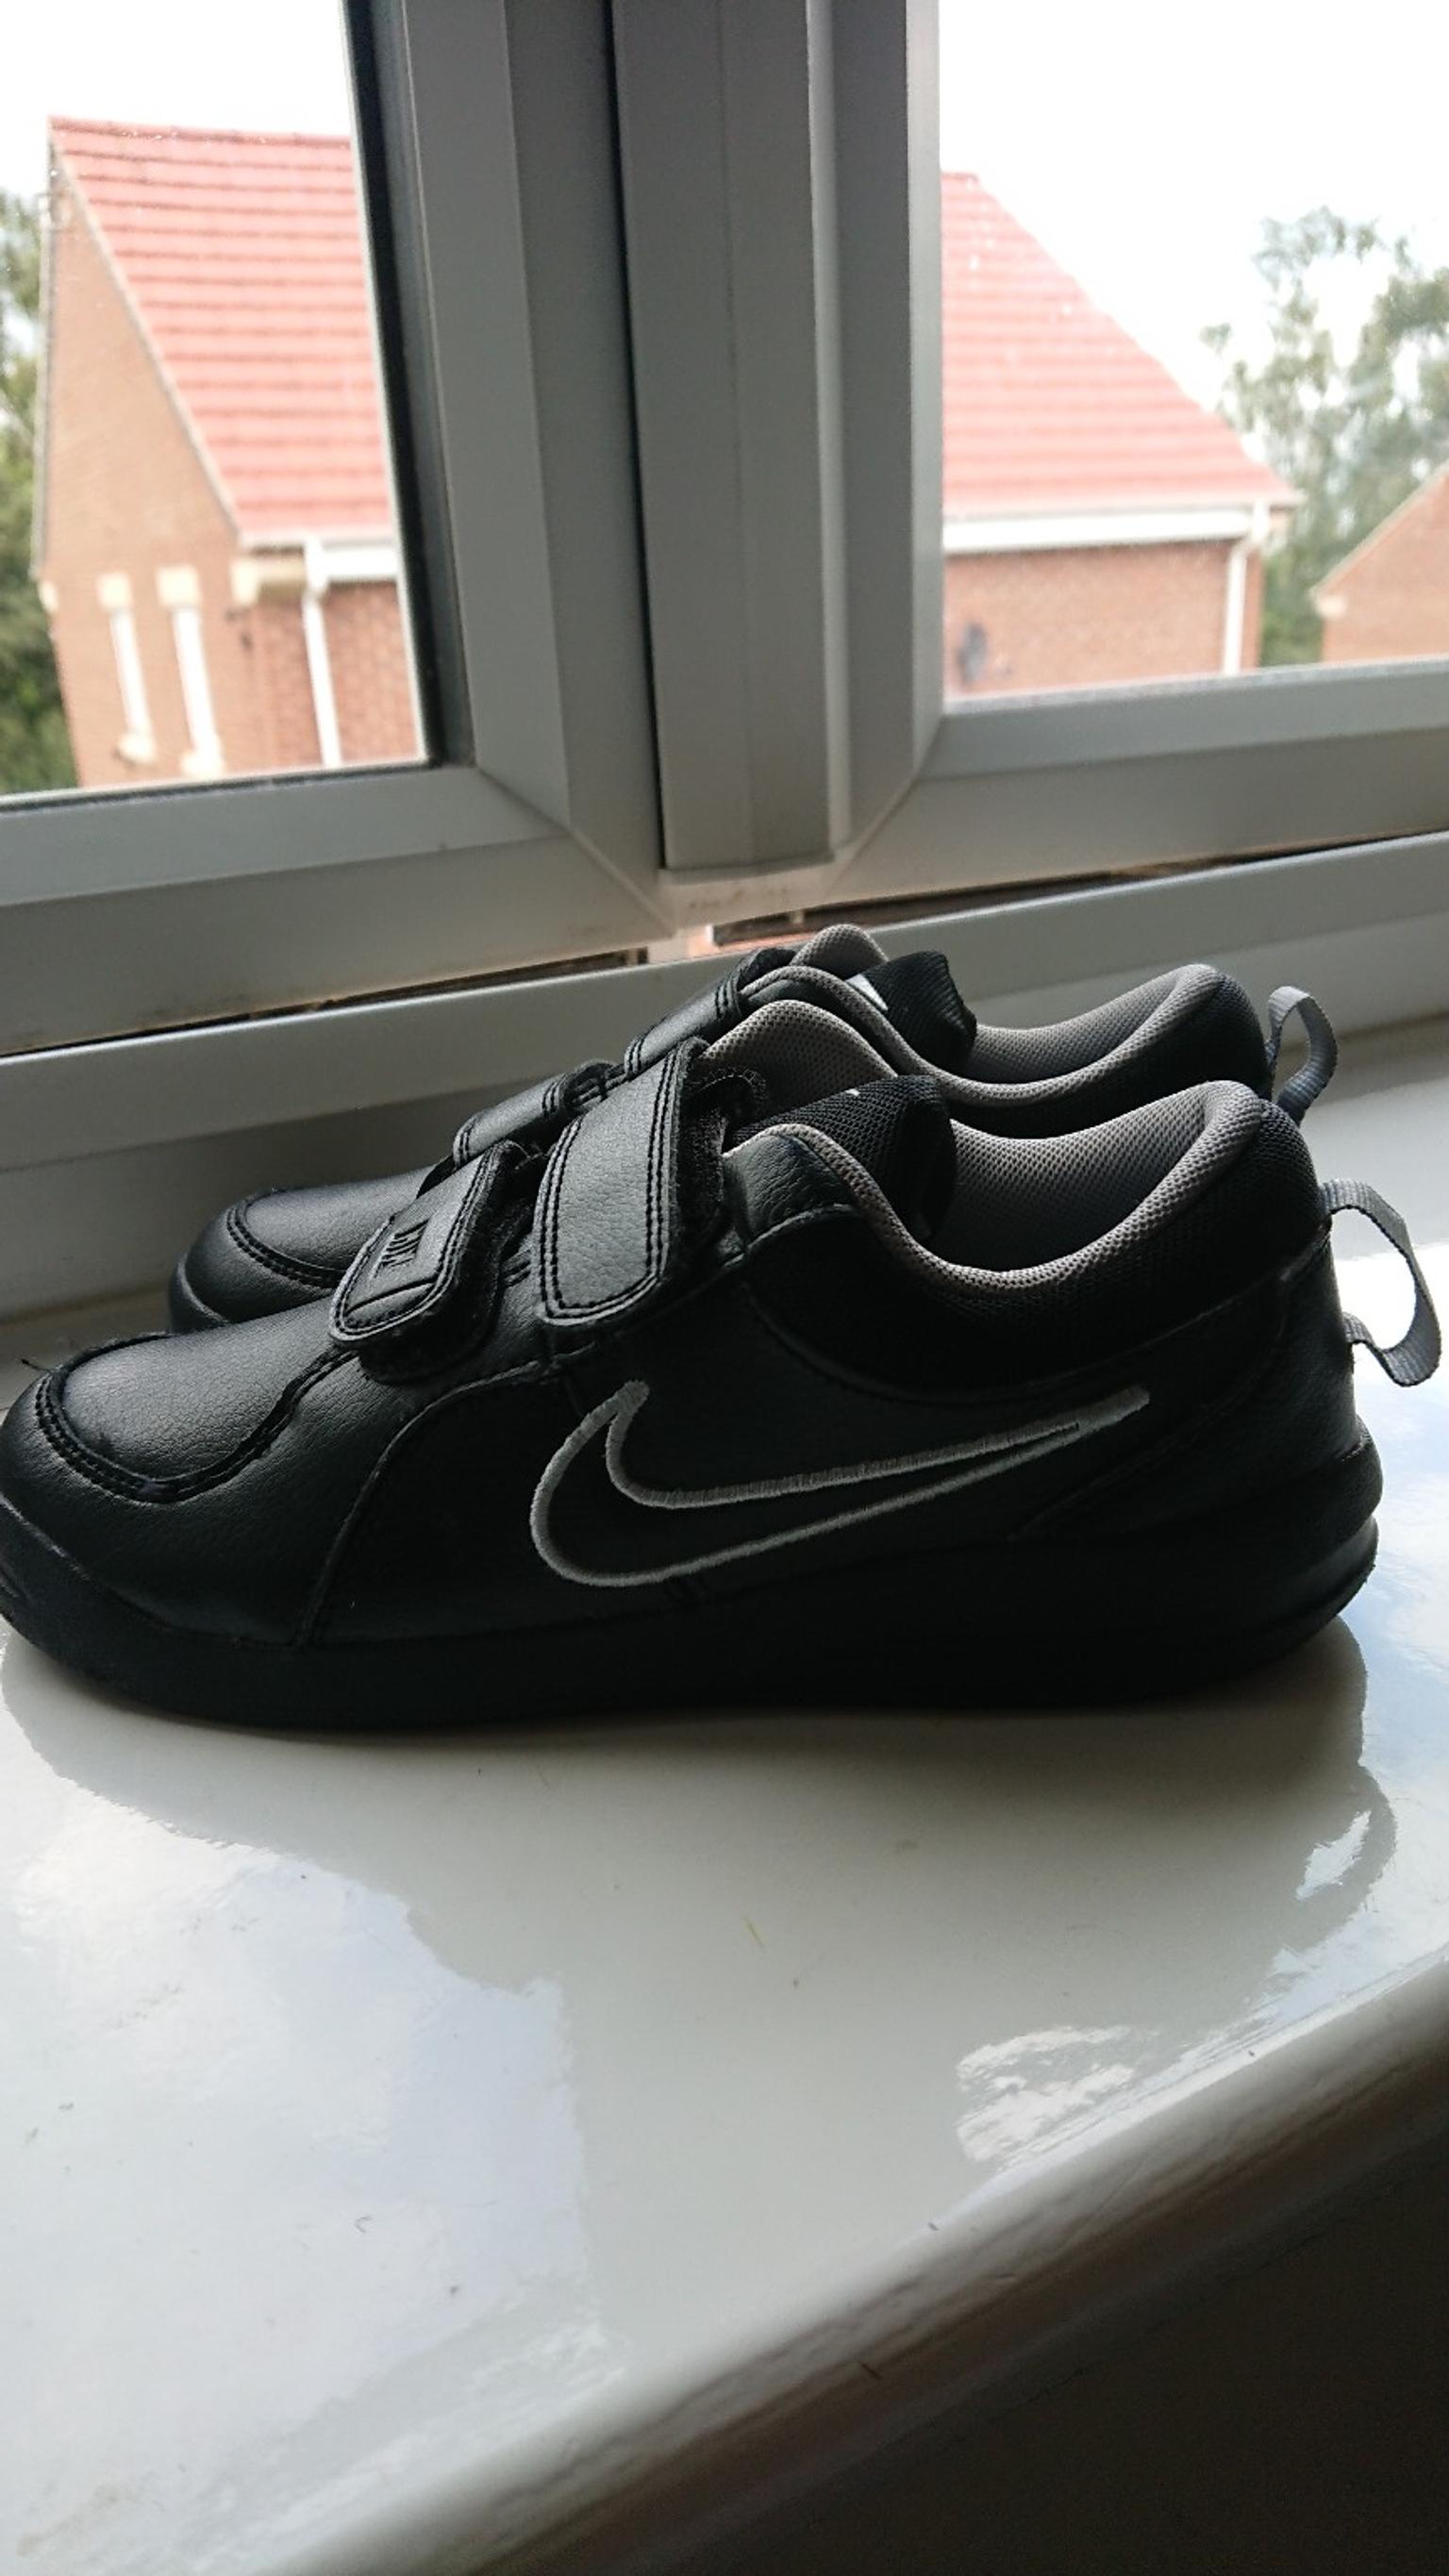 nike school shoes for boys